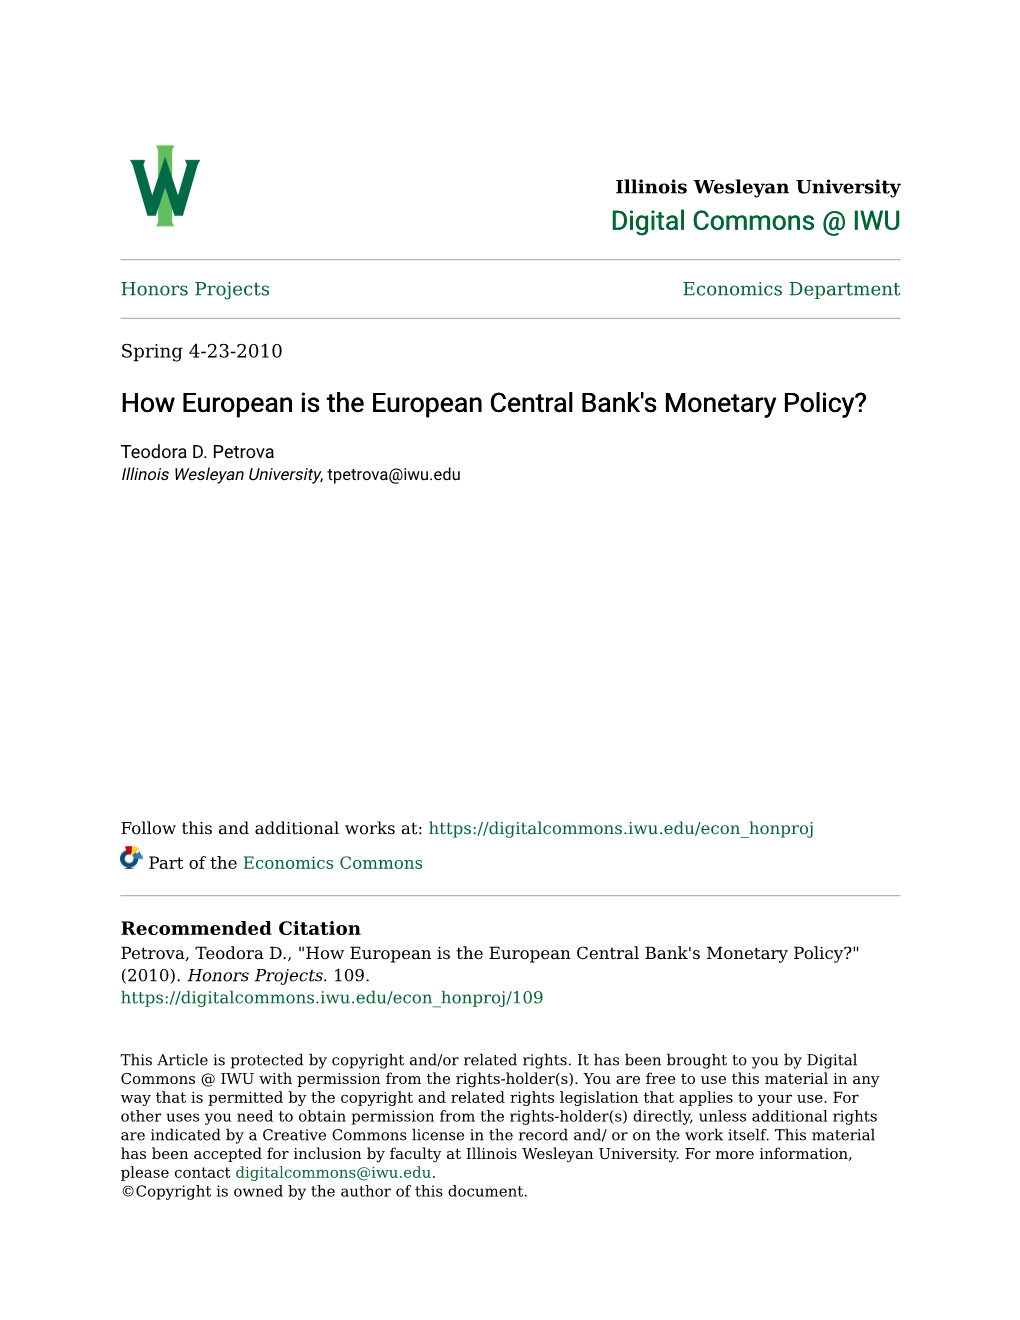 How European Is the European Central Bank's Monetary Policy?